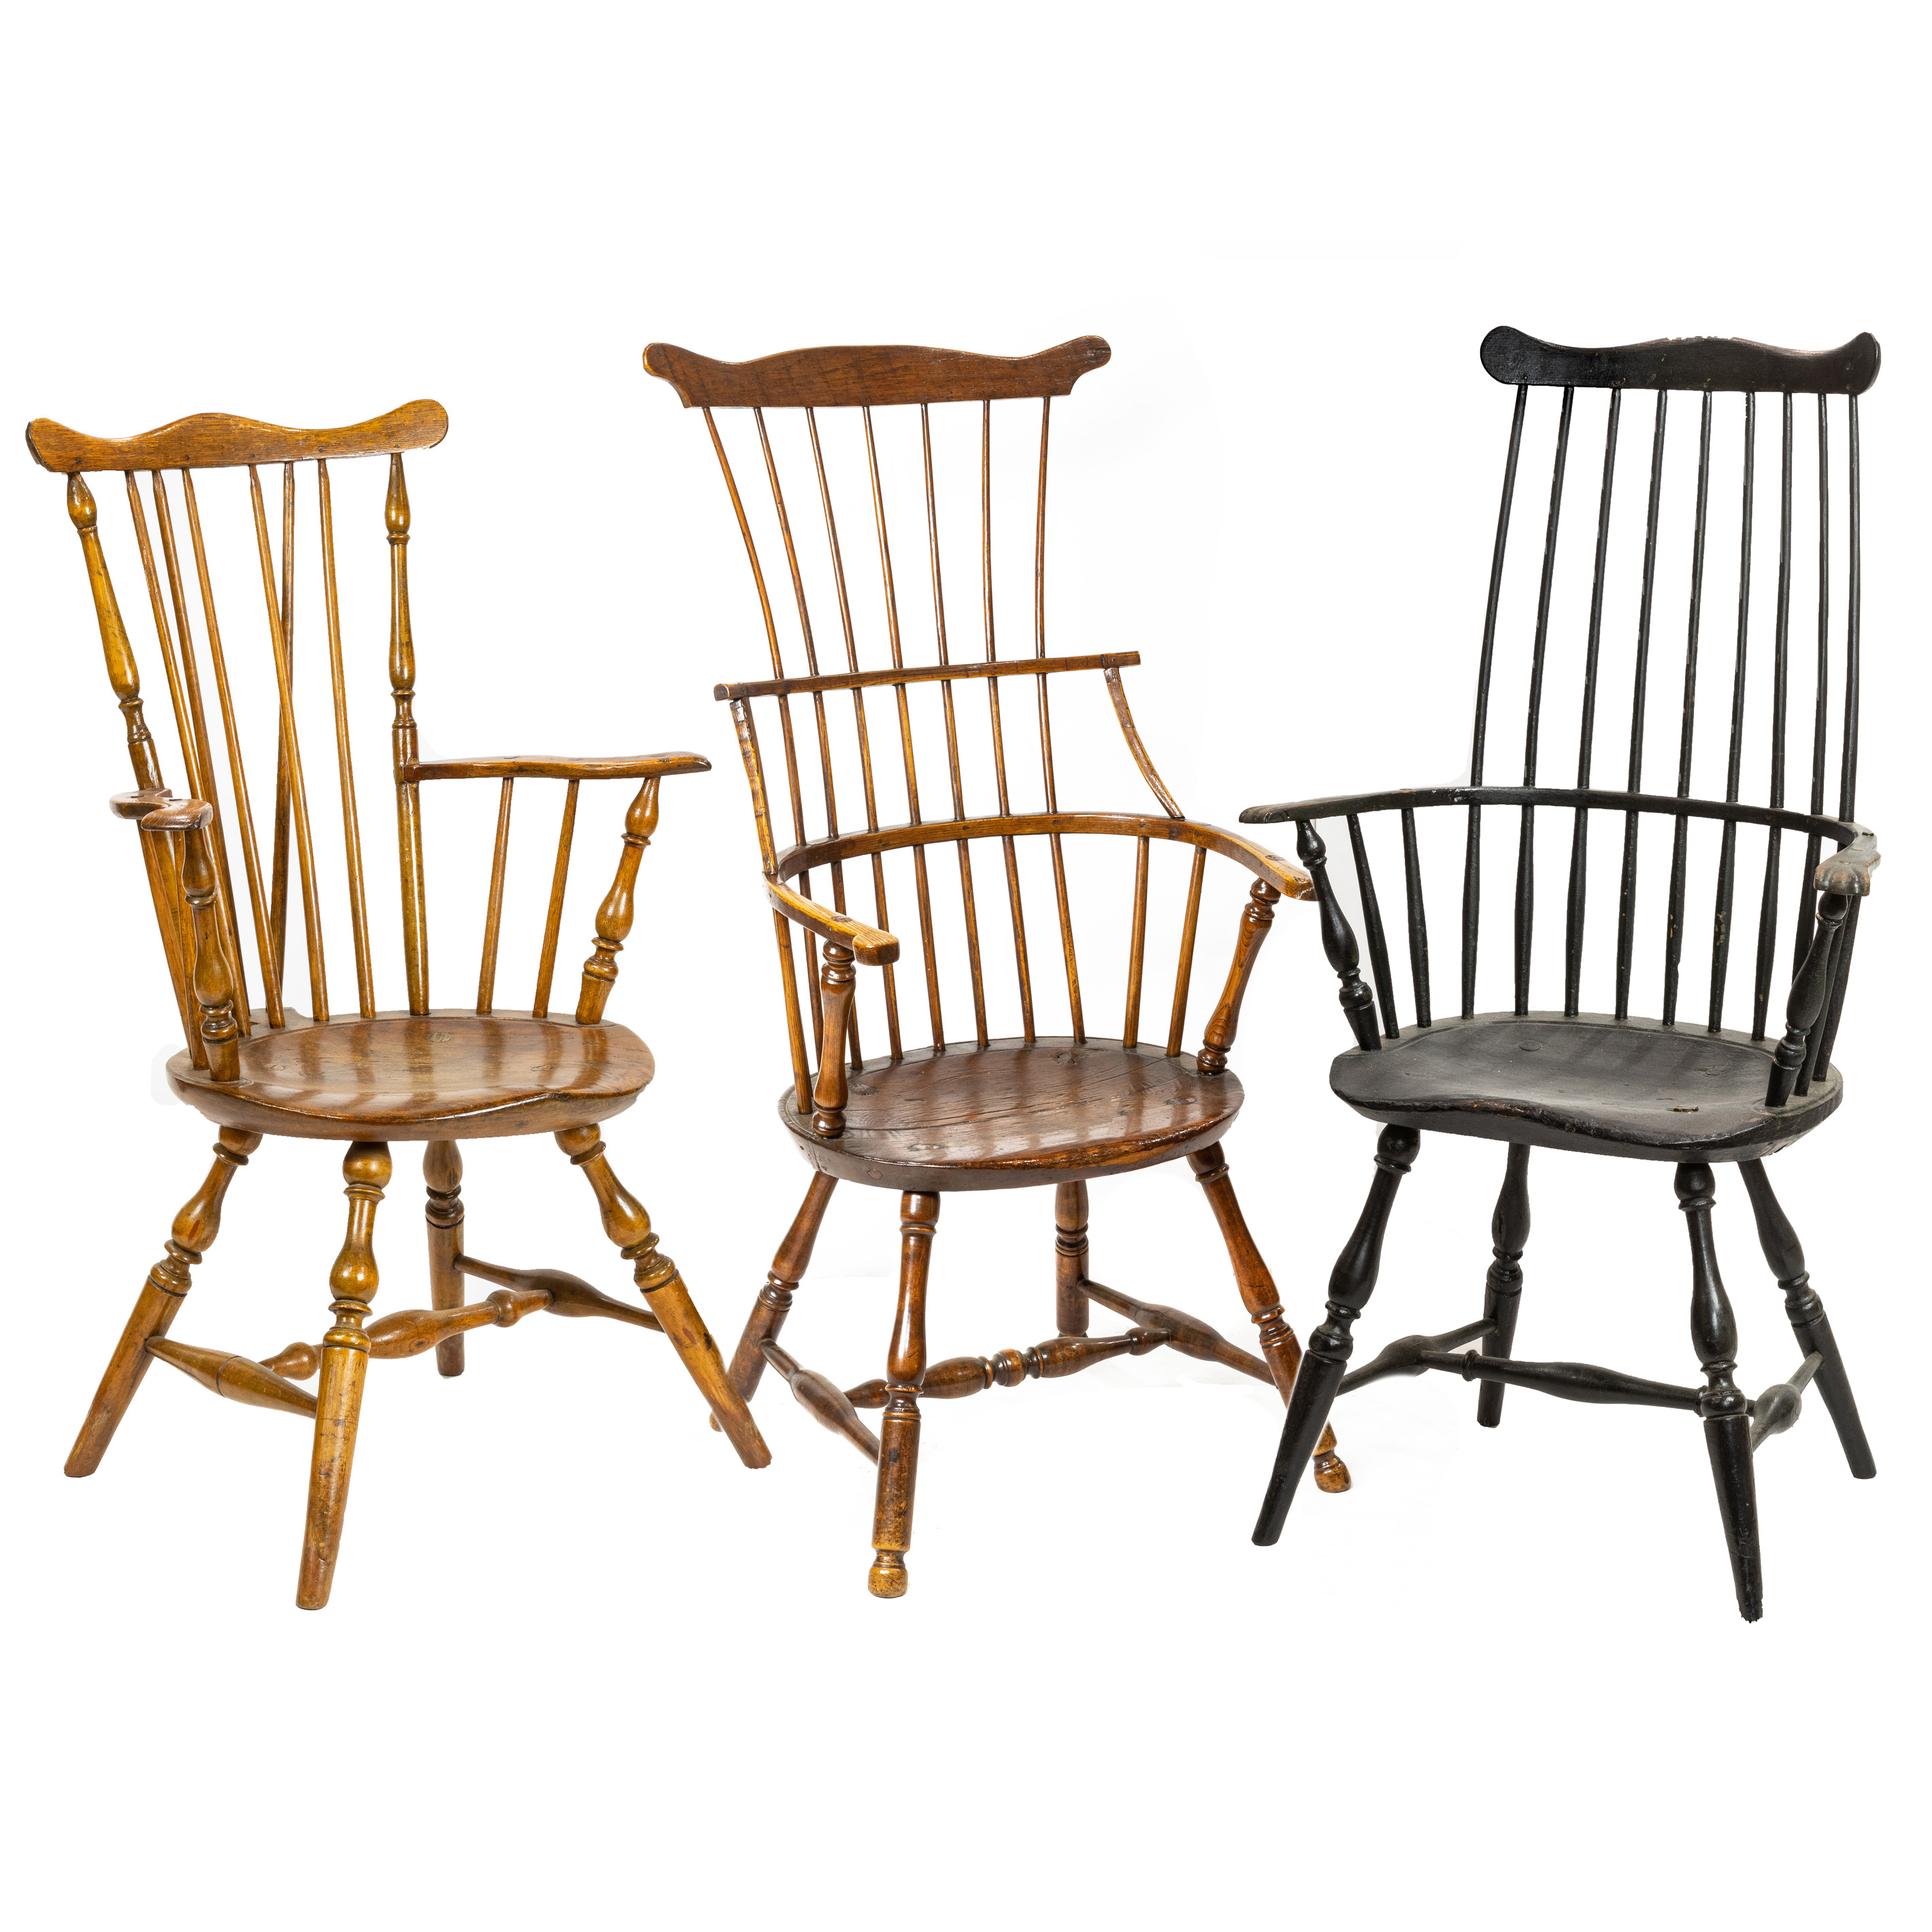  LOT OF 3 WINDSOR ARMCHAIR GROUP 3a46df